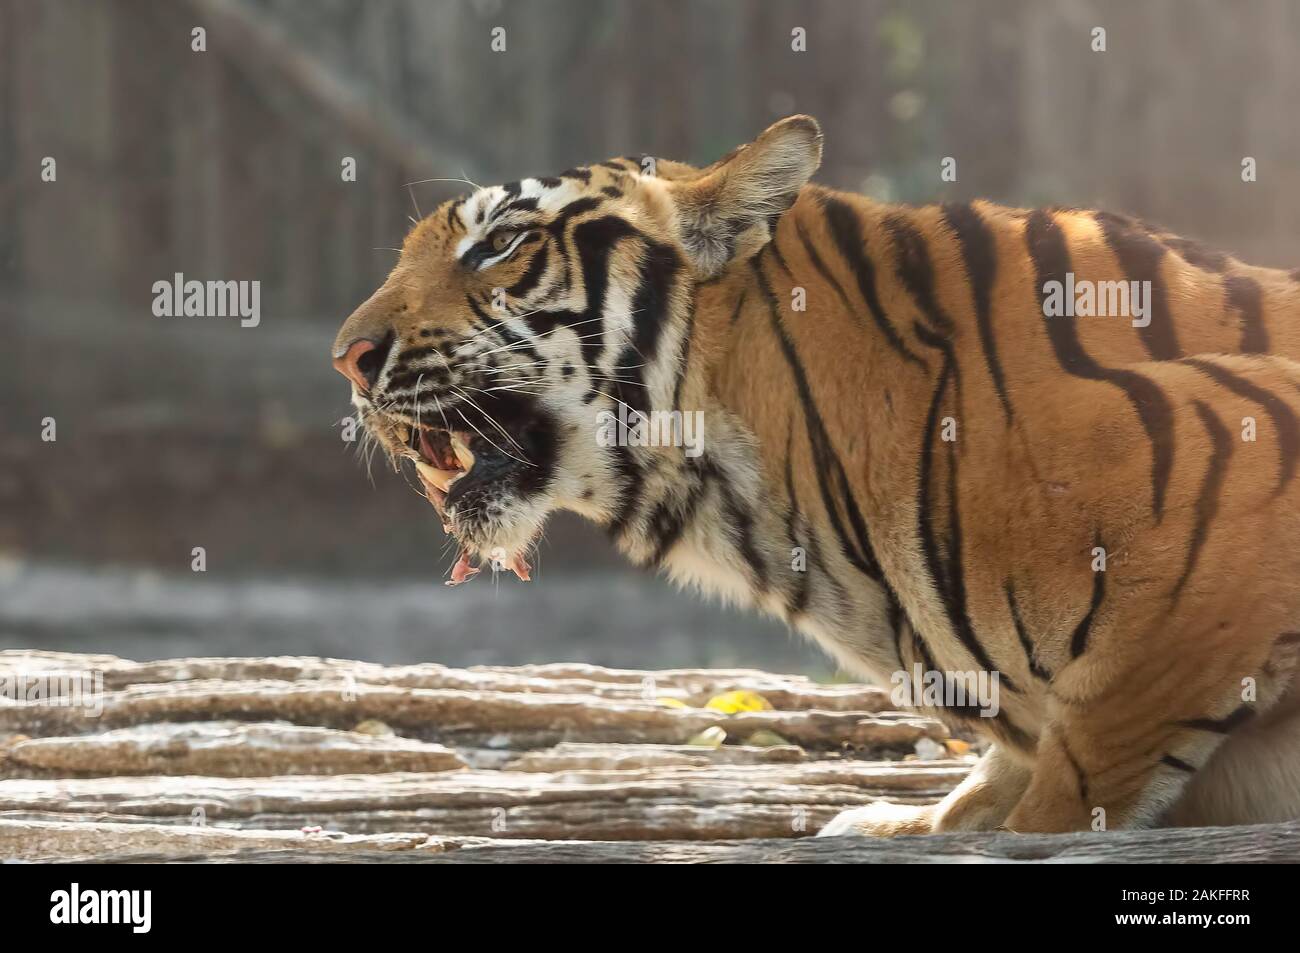 Closeup Bengal Tiger Eating Raw Meat Isolated on Background Stock Photo